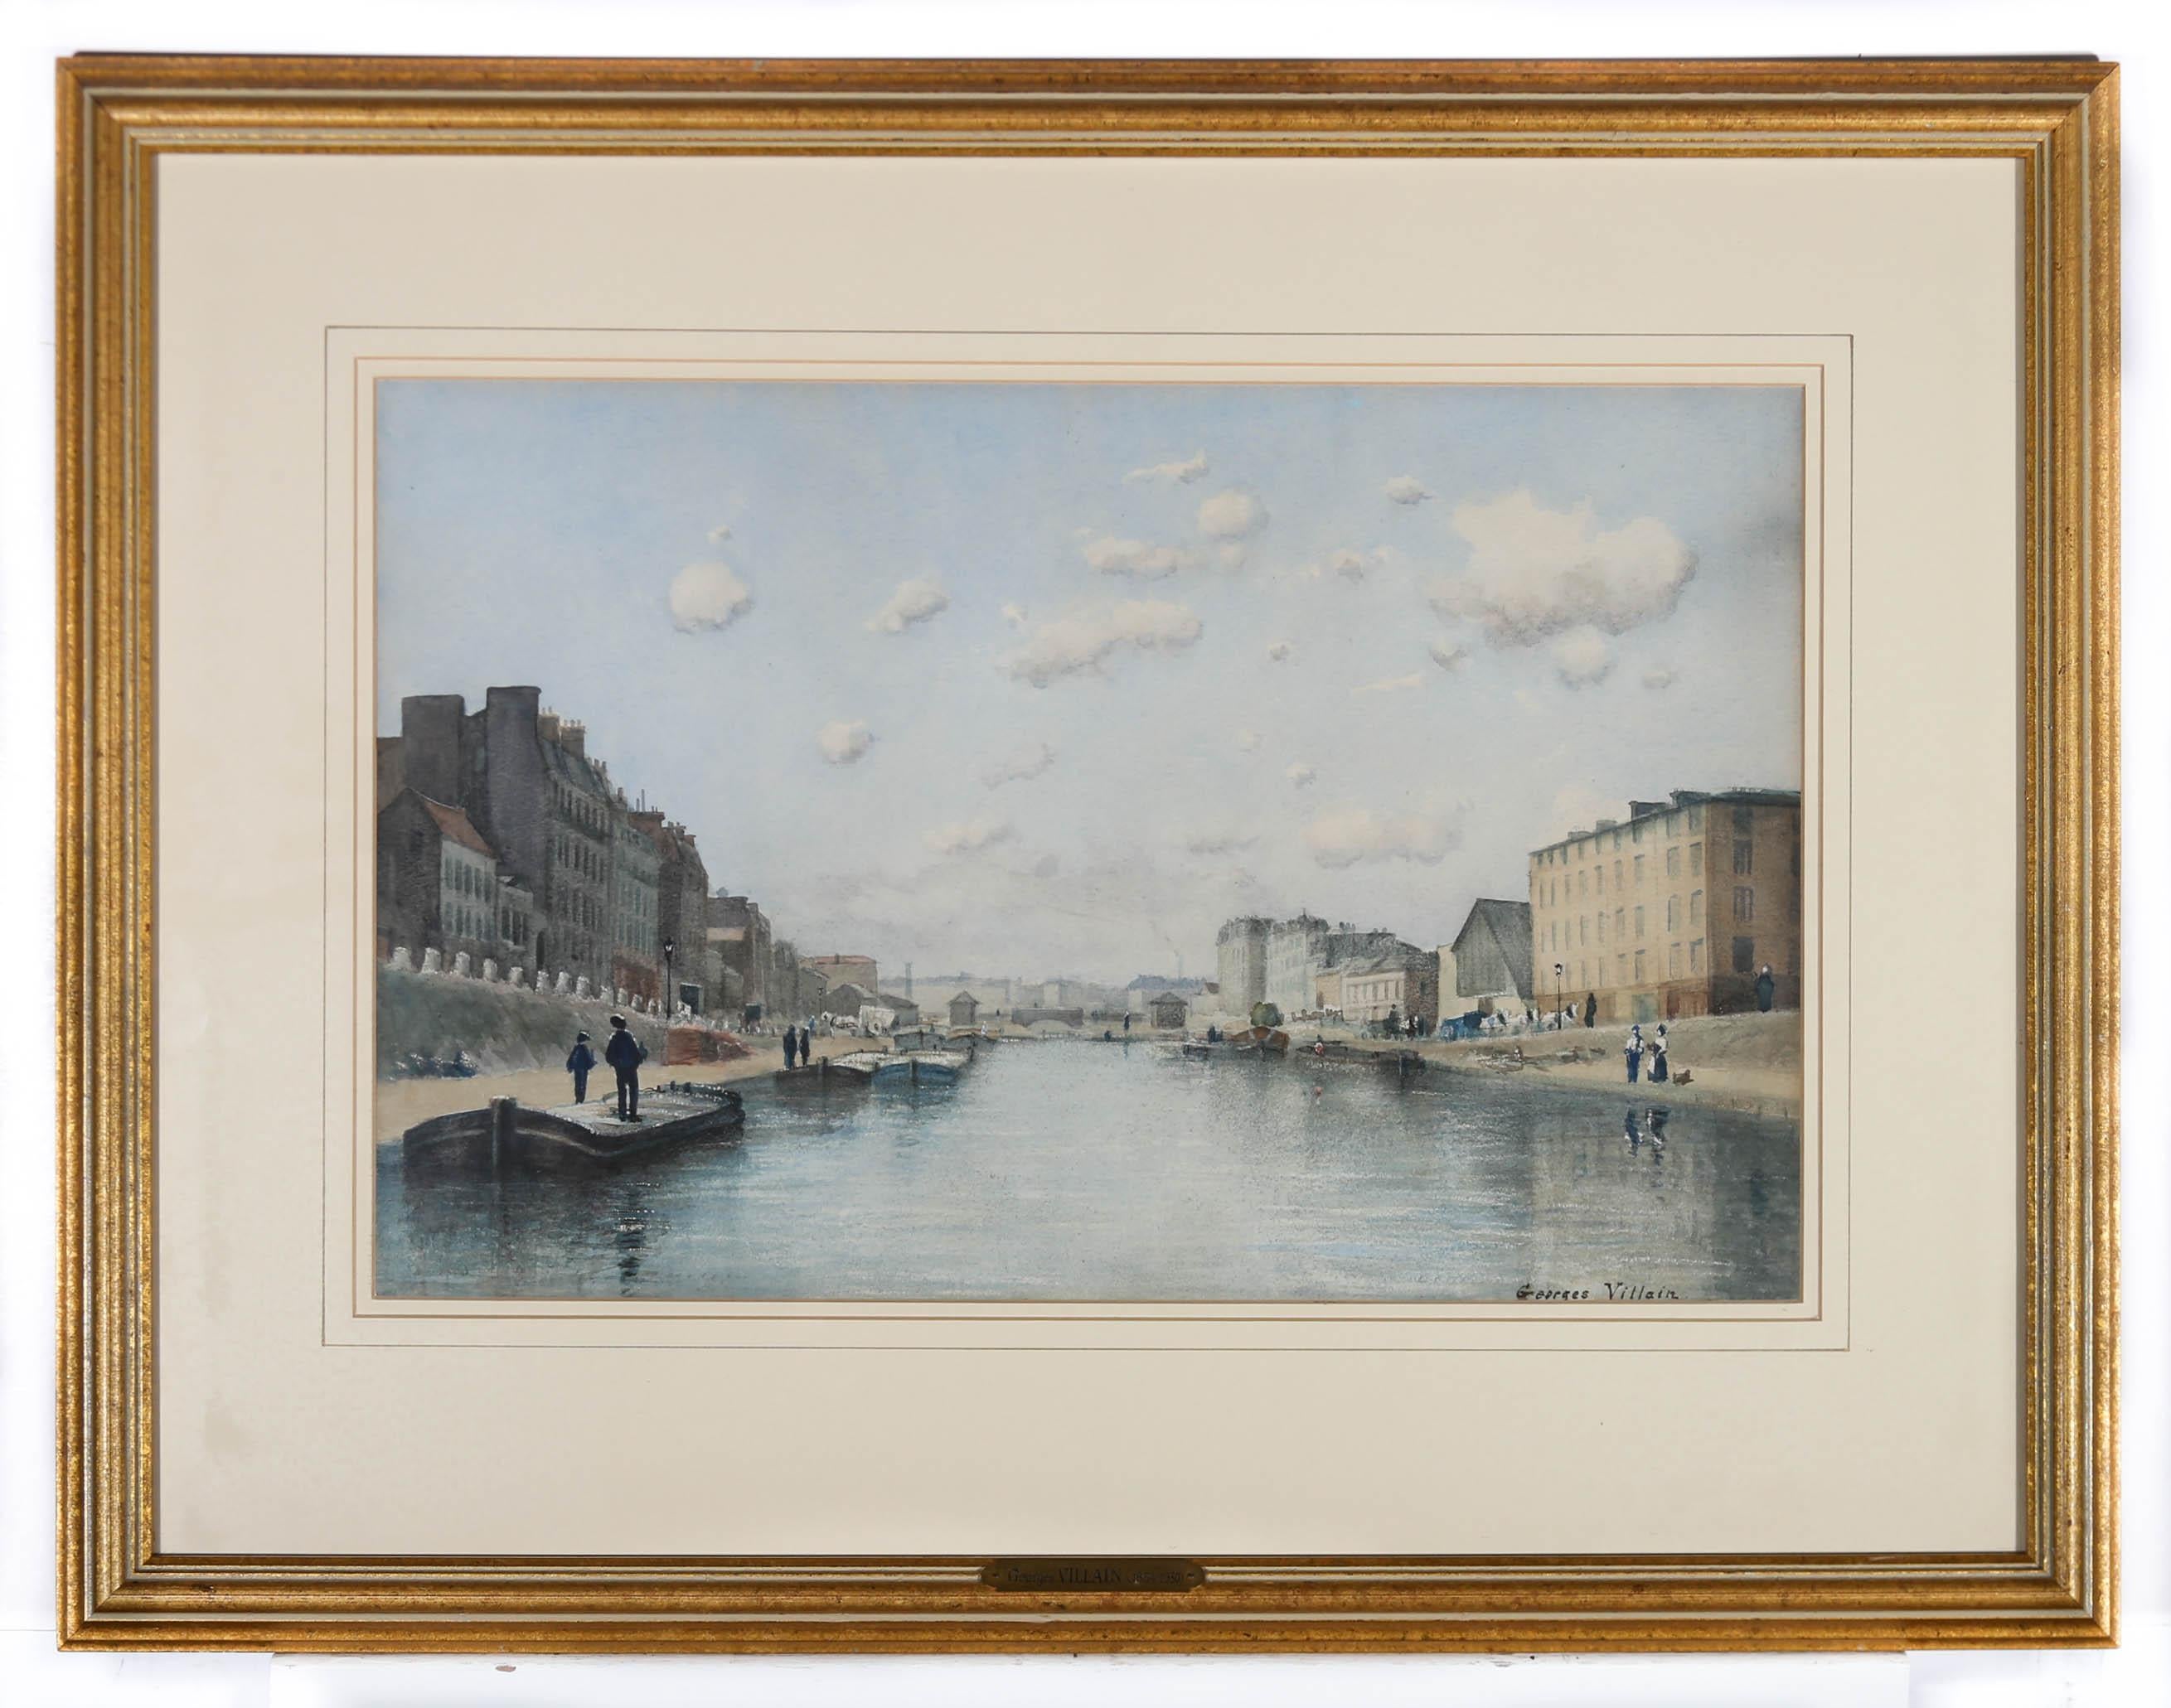 A perspective river scene in watercolour by Georges Villain (1854-1930), depicting french town houses in parallel with moored barges on a busy waterway. The painting is signed to the lower right-hand corner. Well presented in a wash-line mount and